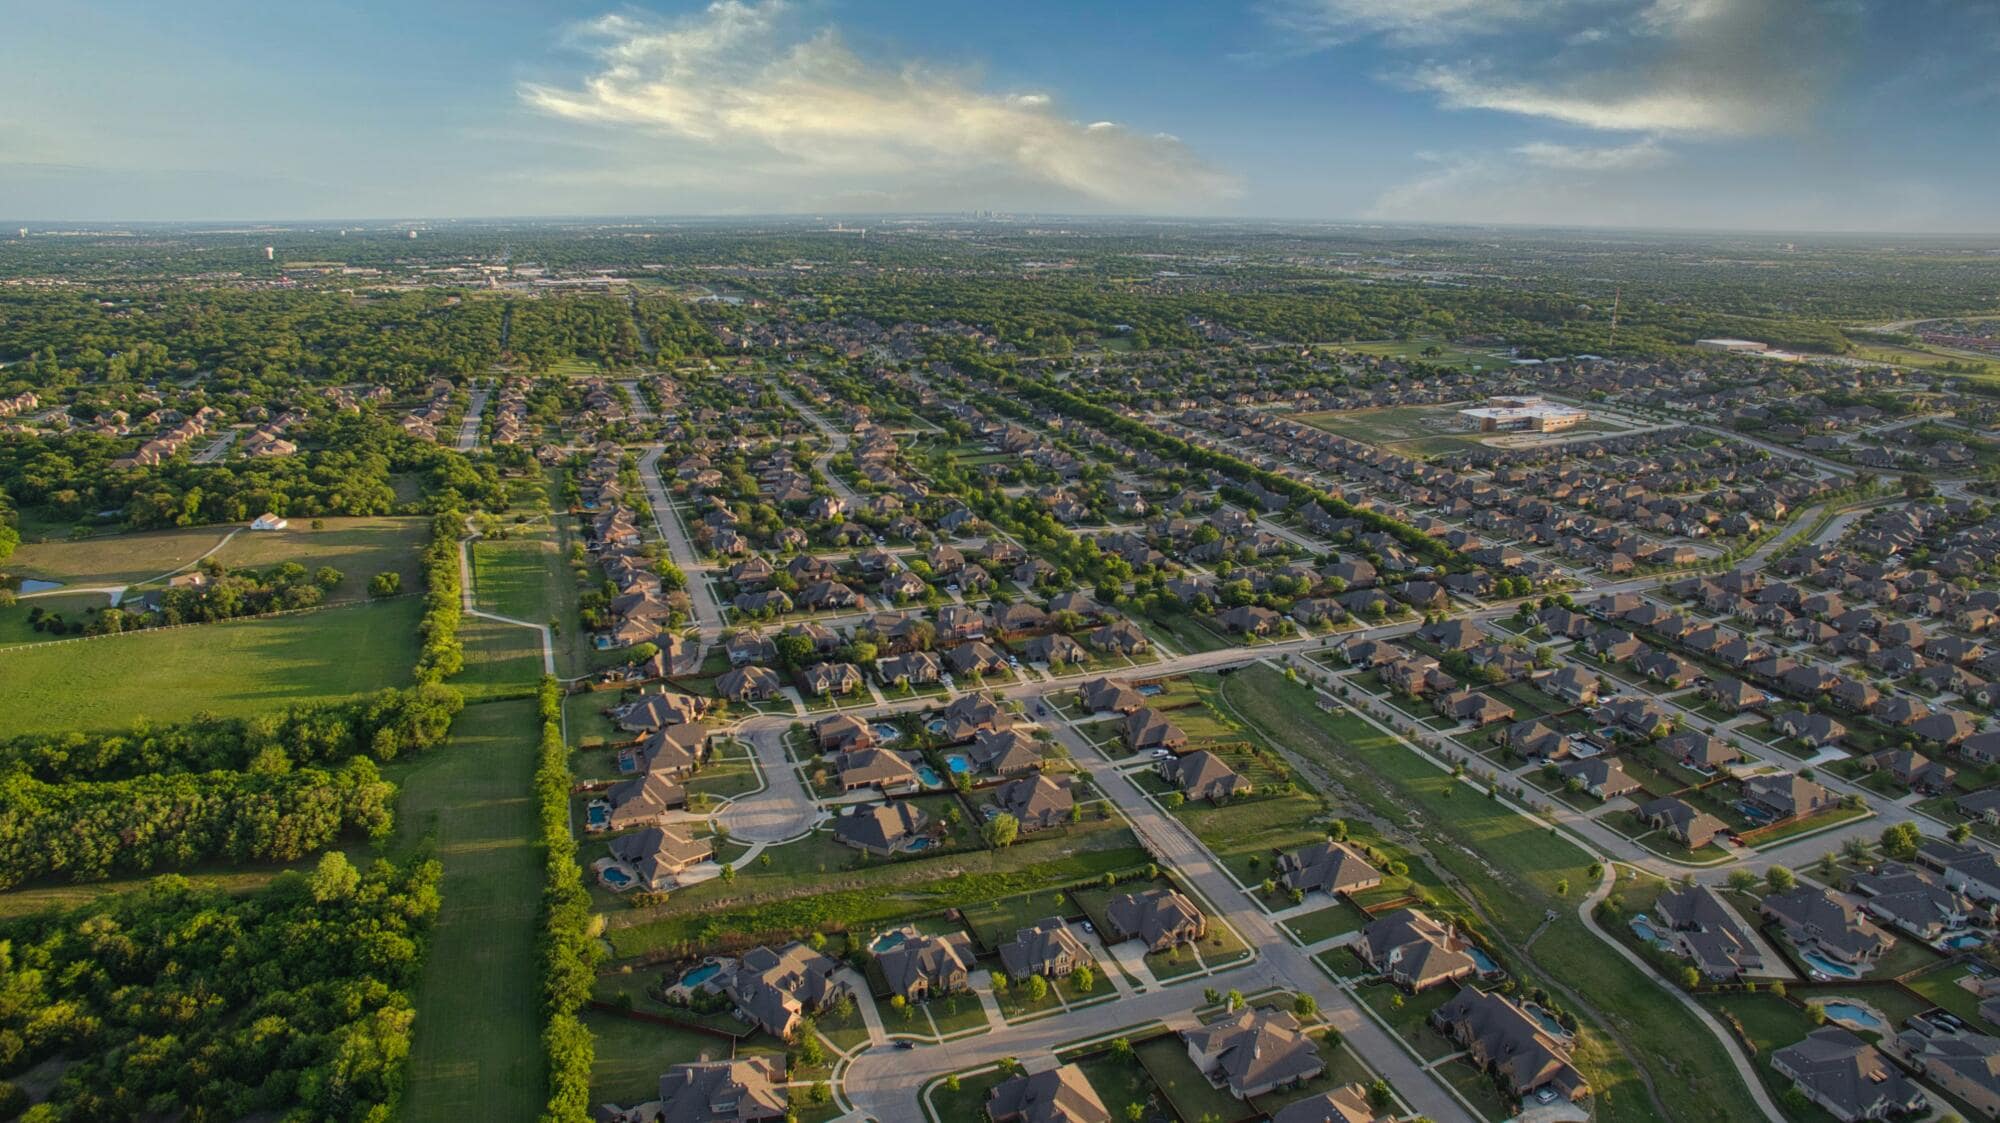 Homeowners Association Property Manager: Enriching HOA Communities with Expertise